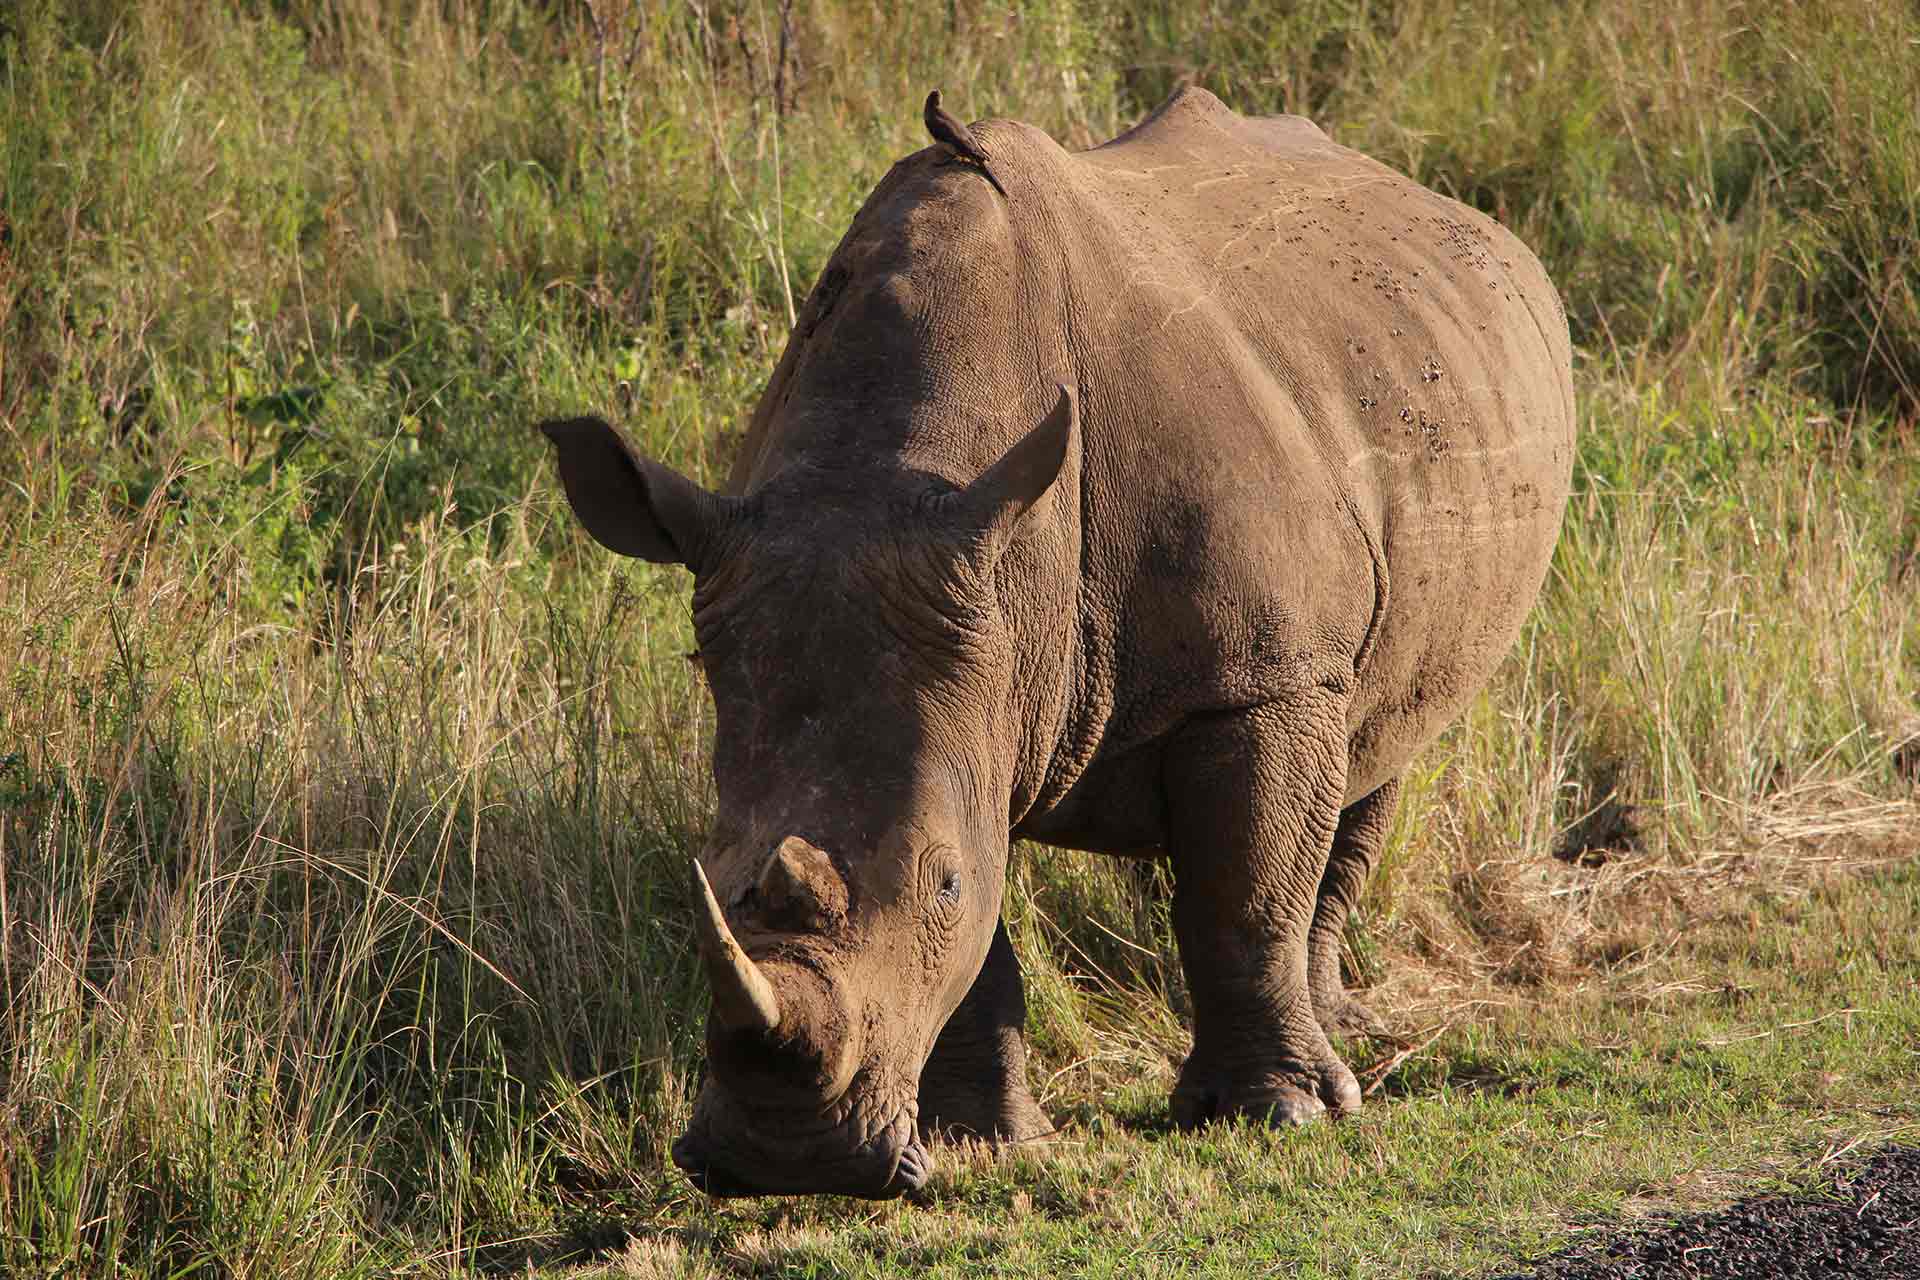 Watching a rhino graze in South Africa’s Hluhluwe Game Reserve.